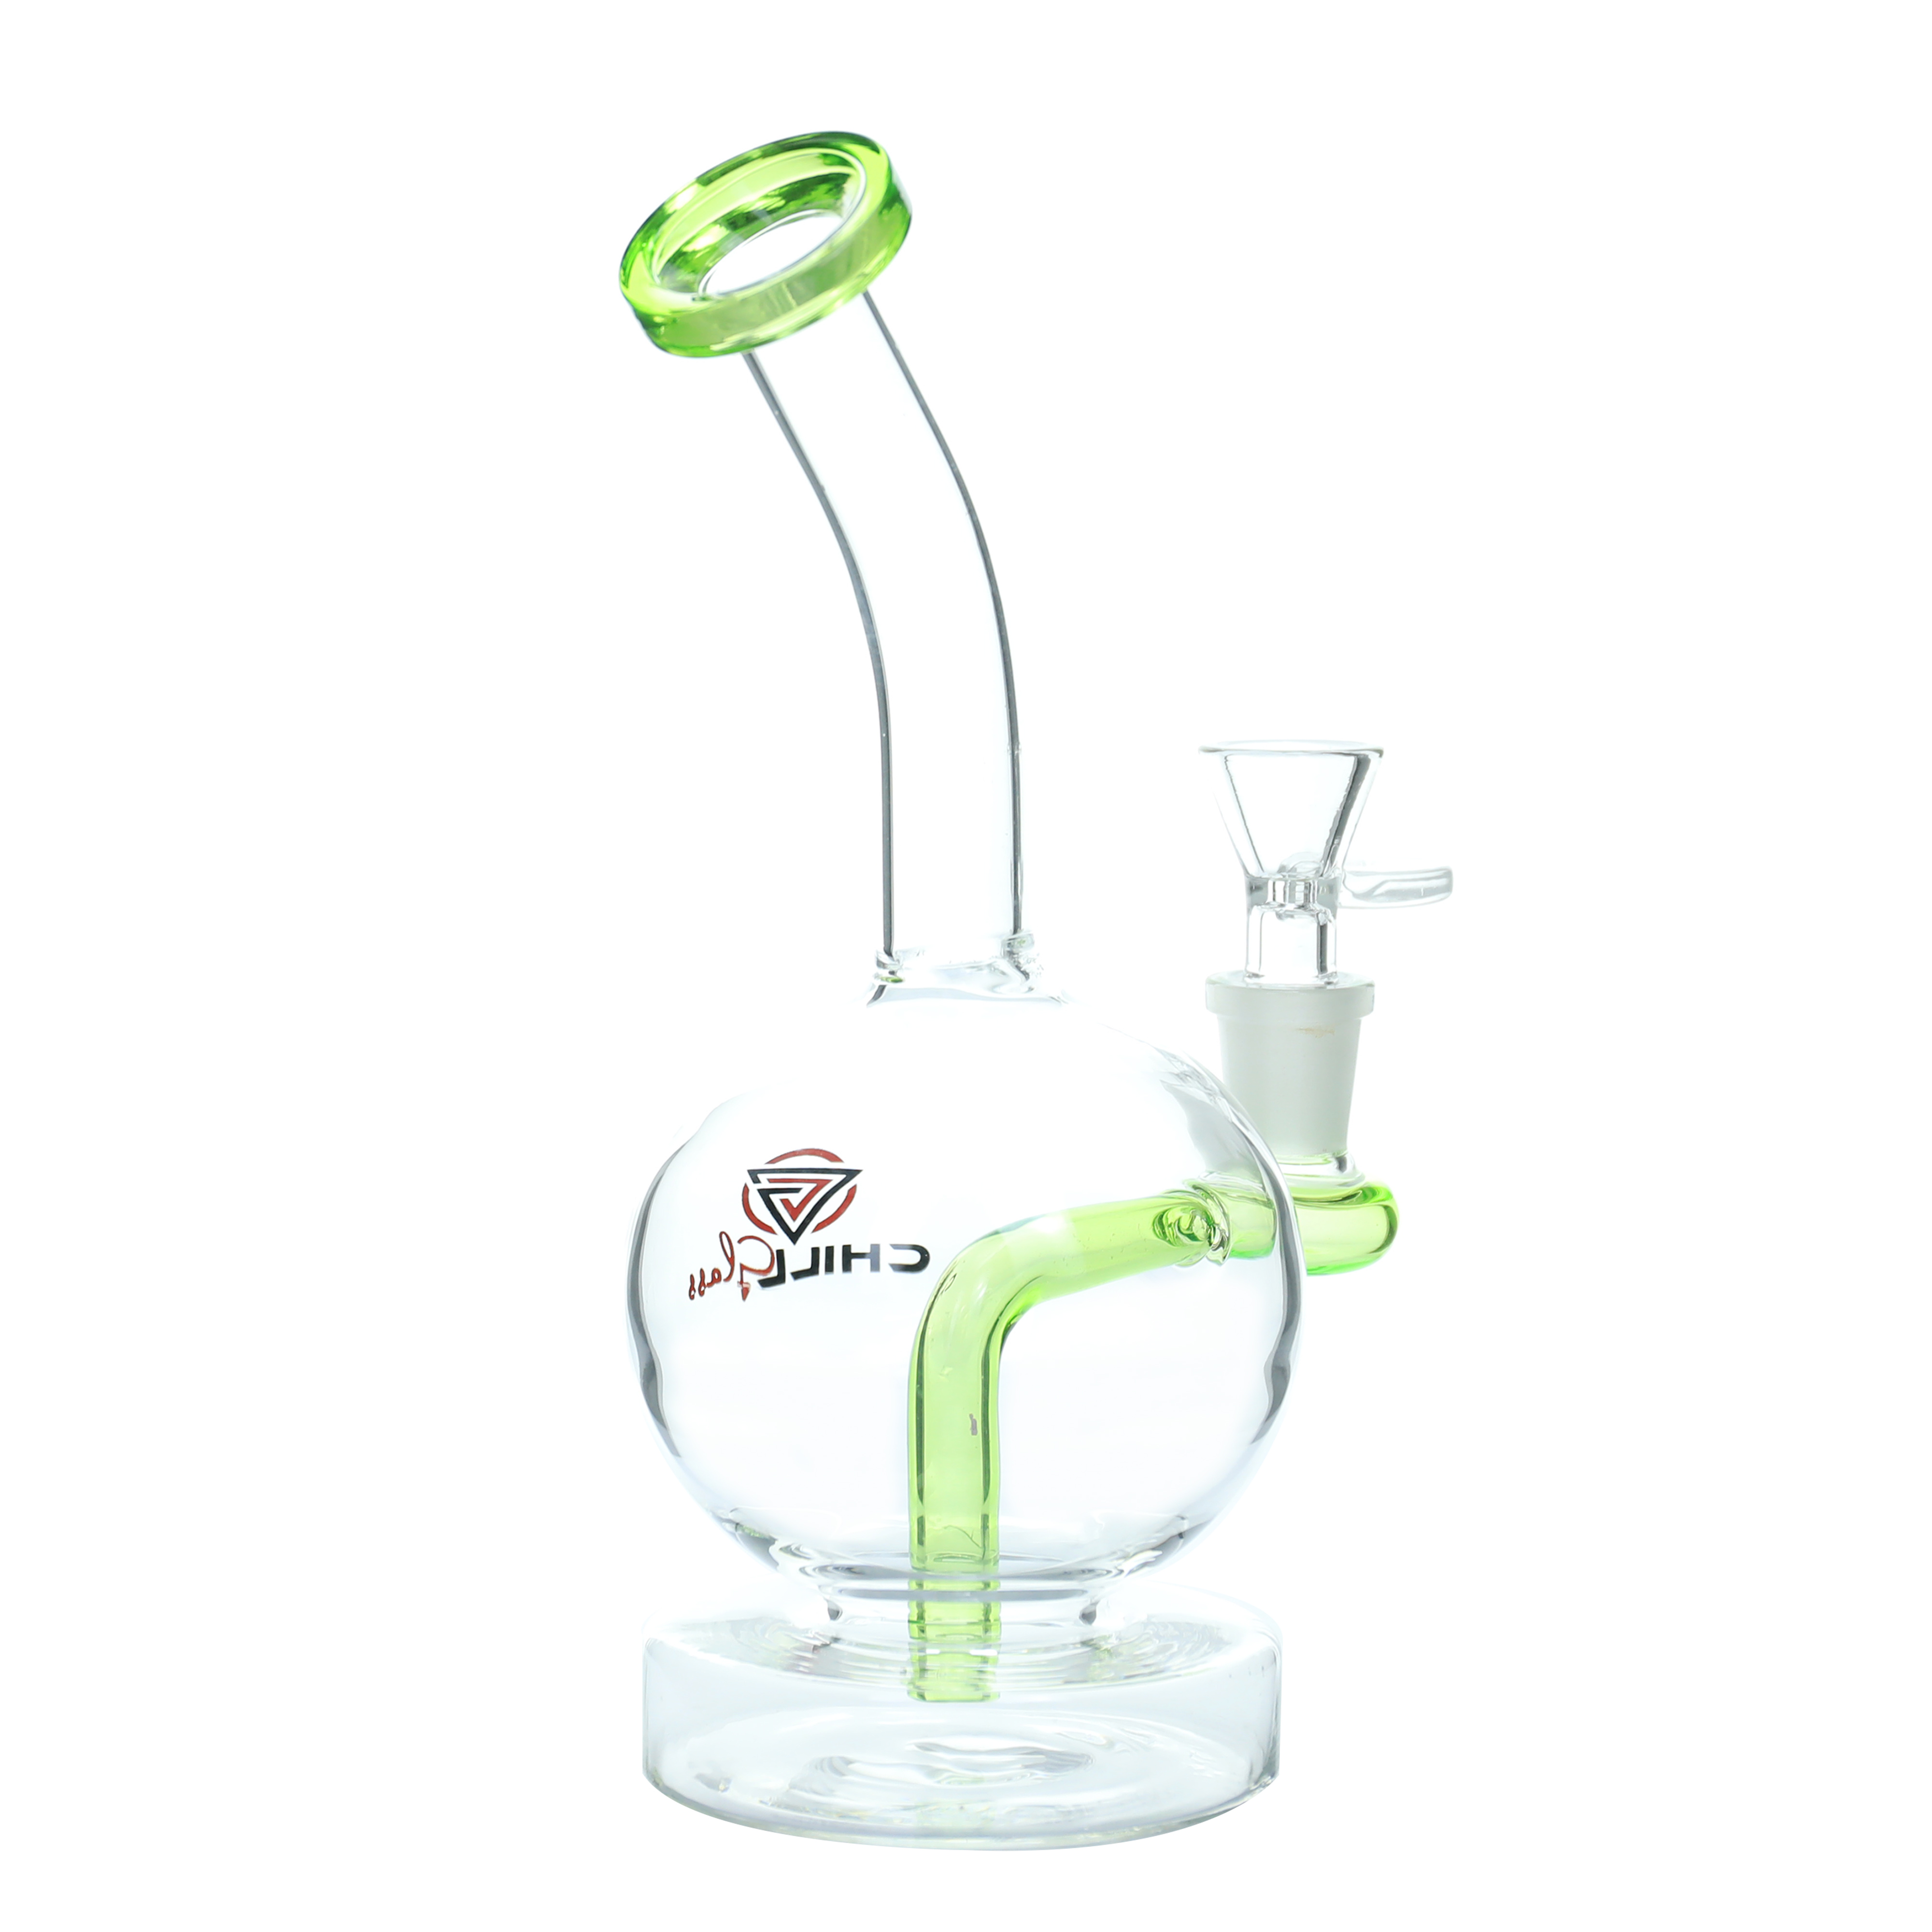 Chill Glass JLE-66